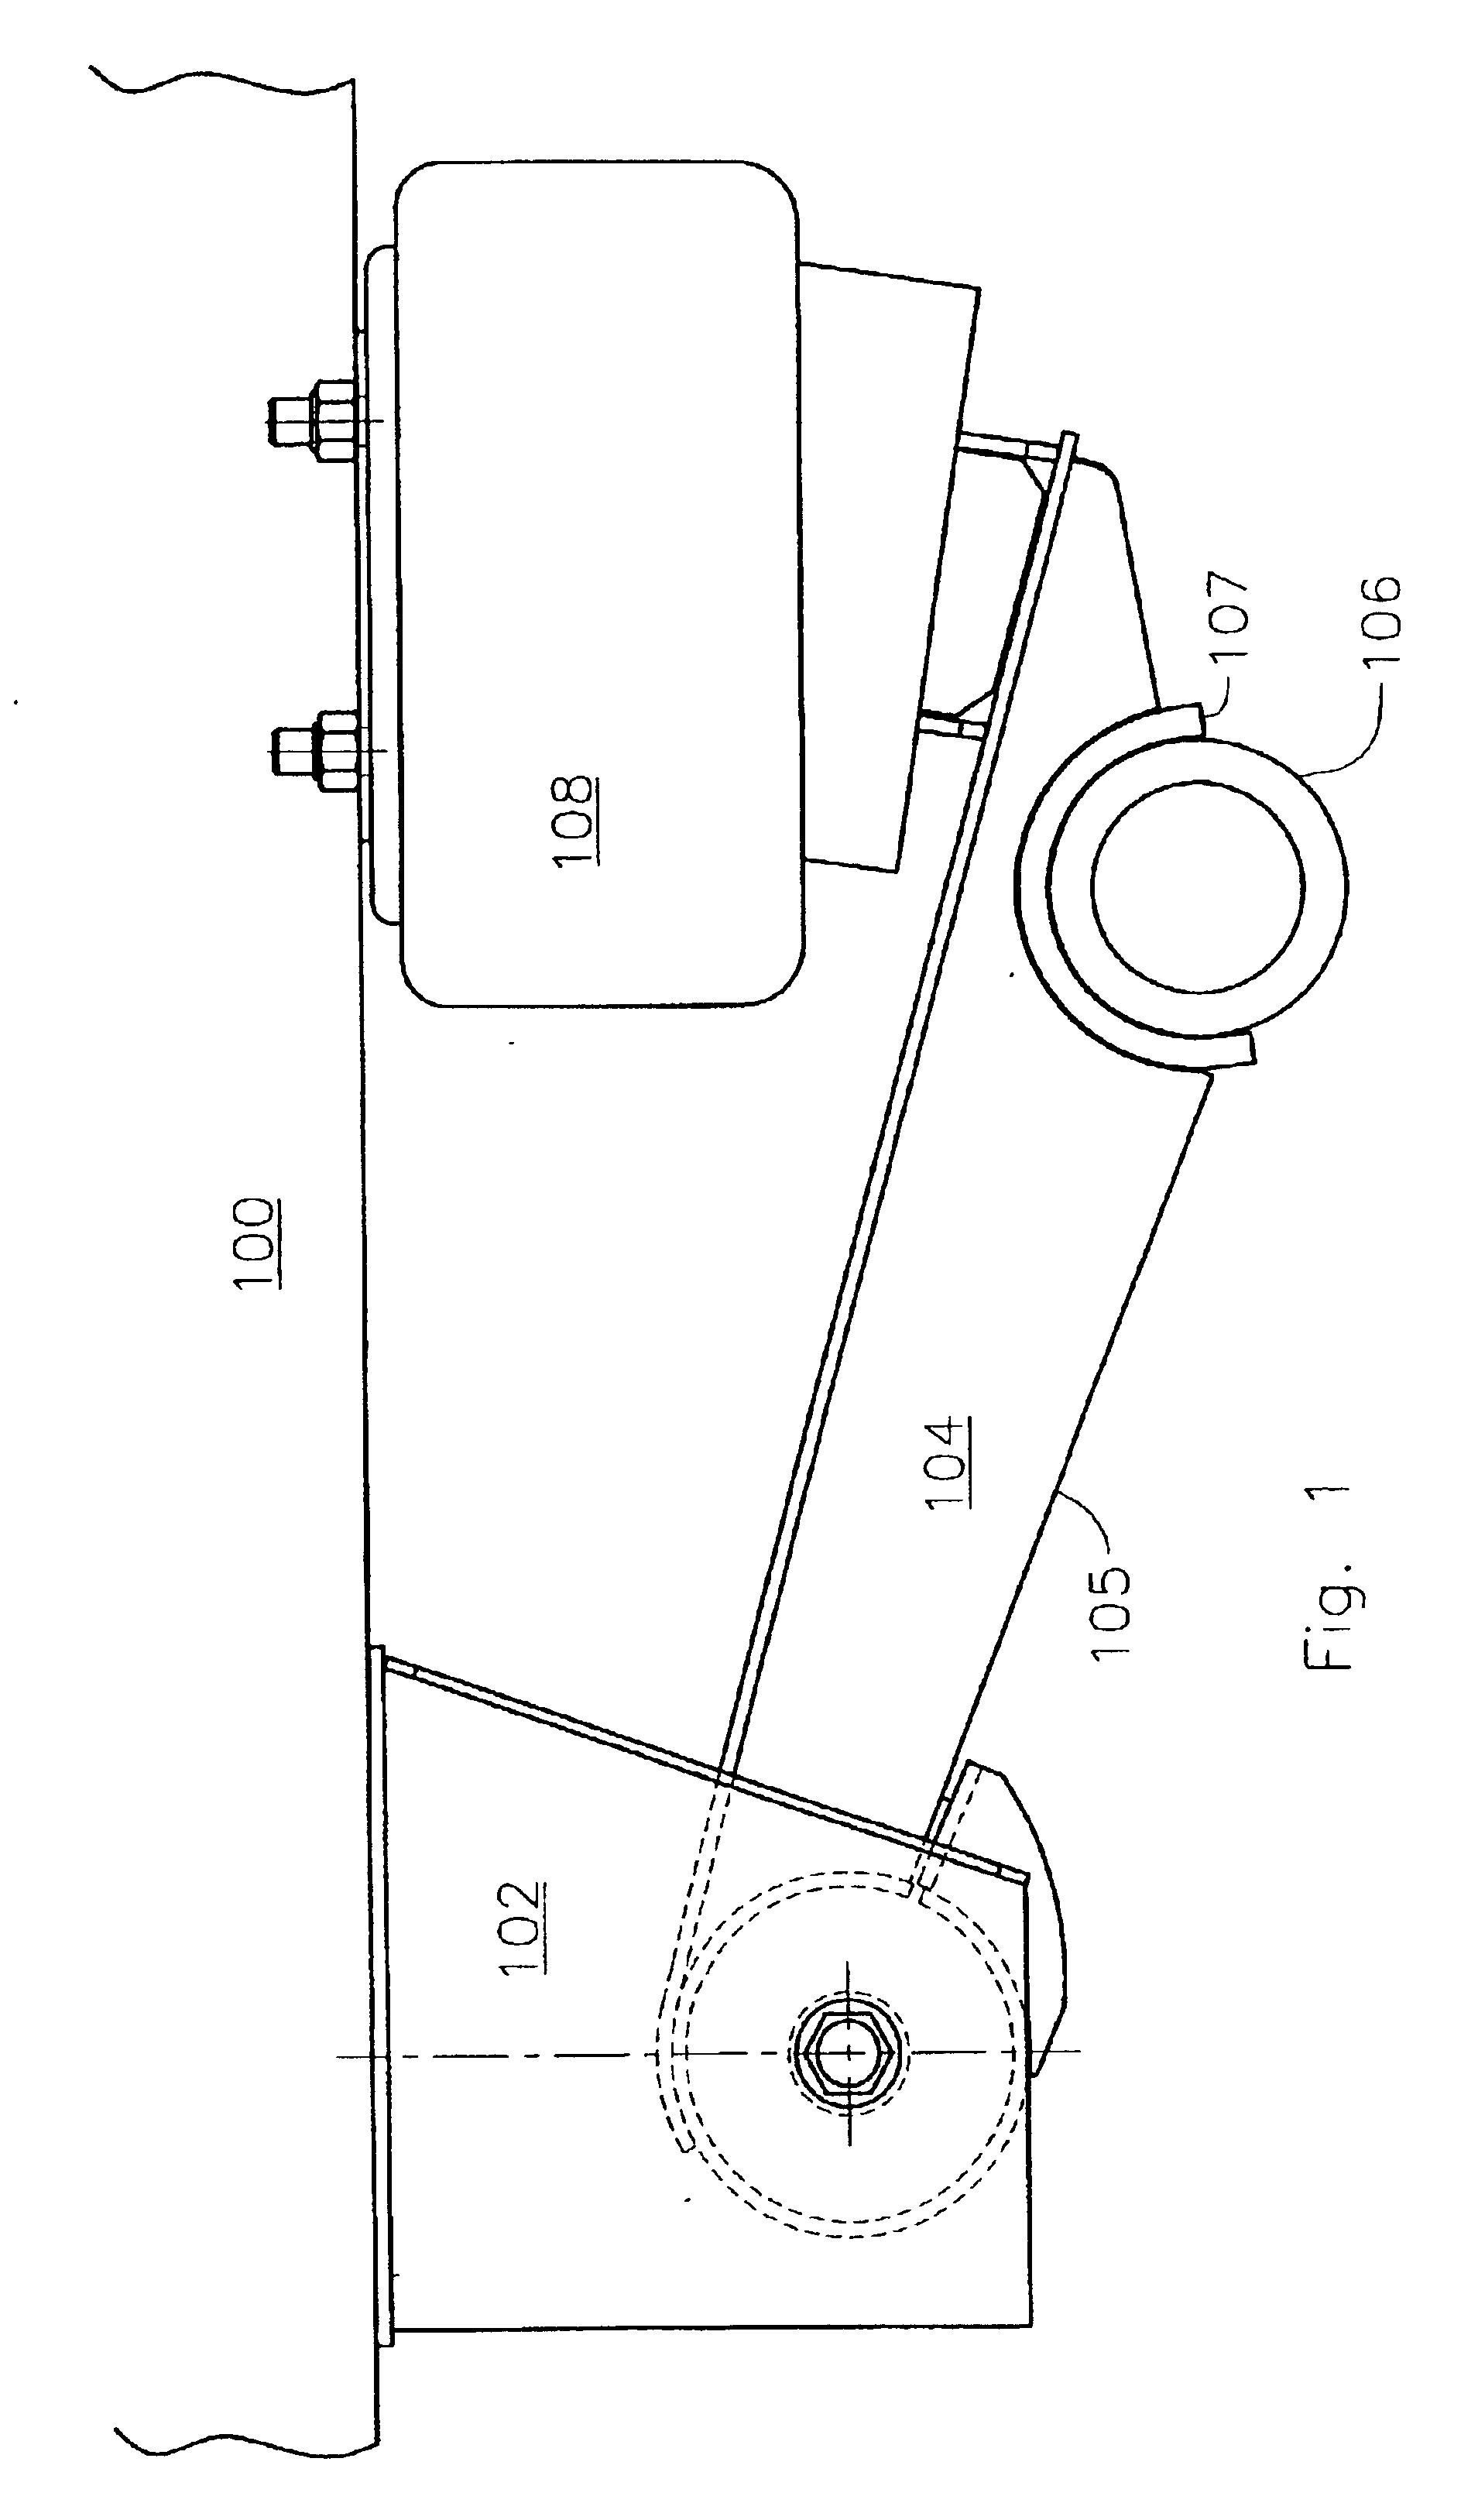 Suspension beam and bush attachment assembly